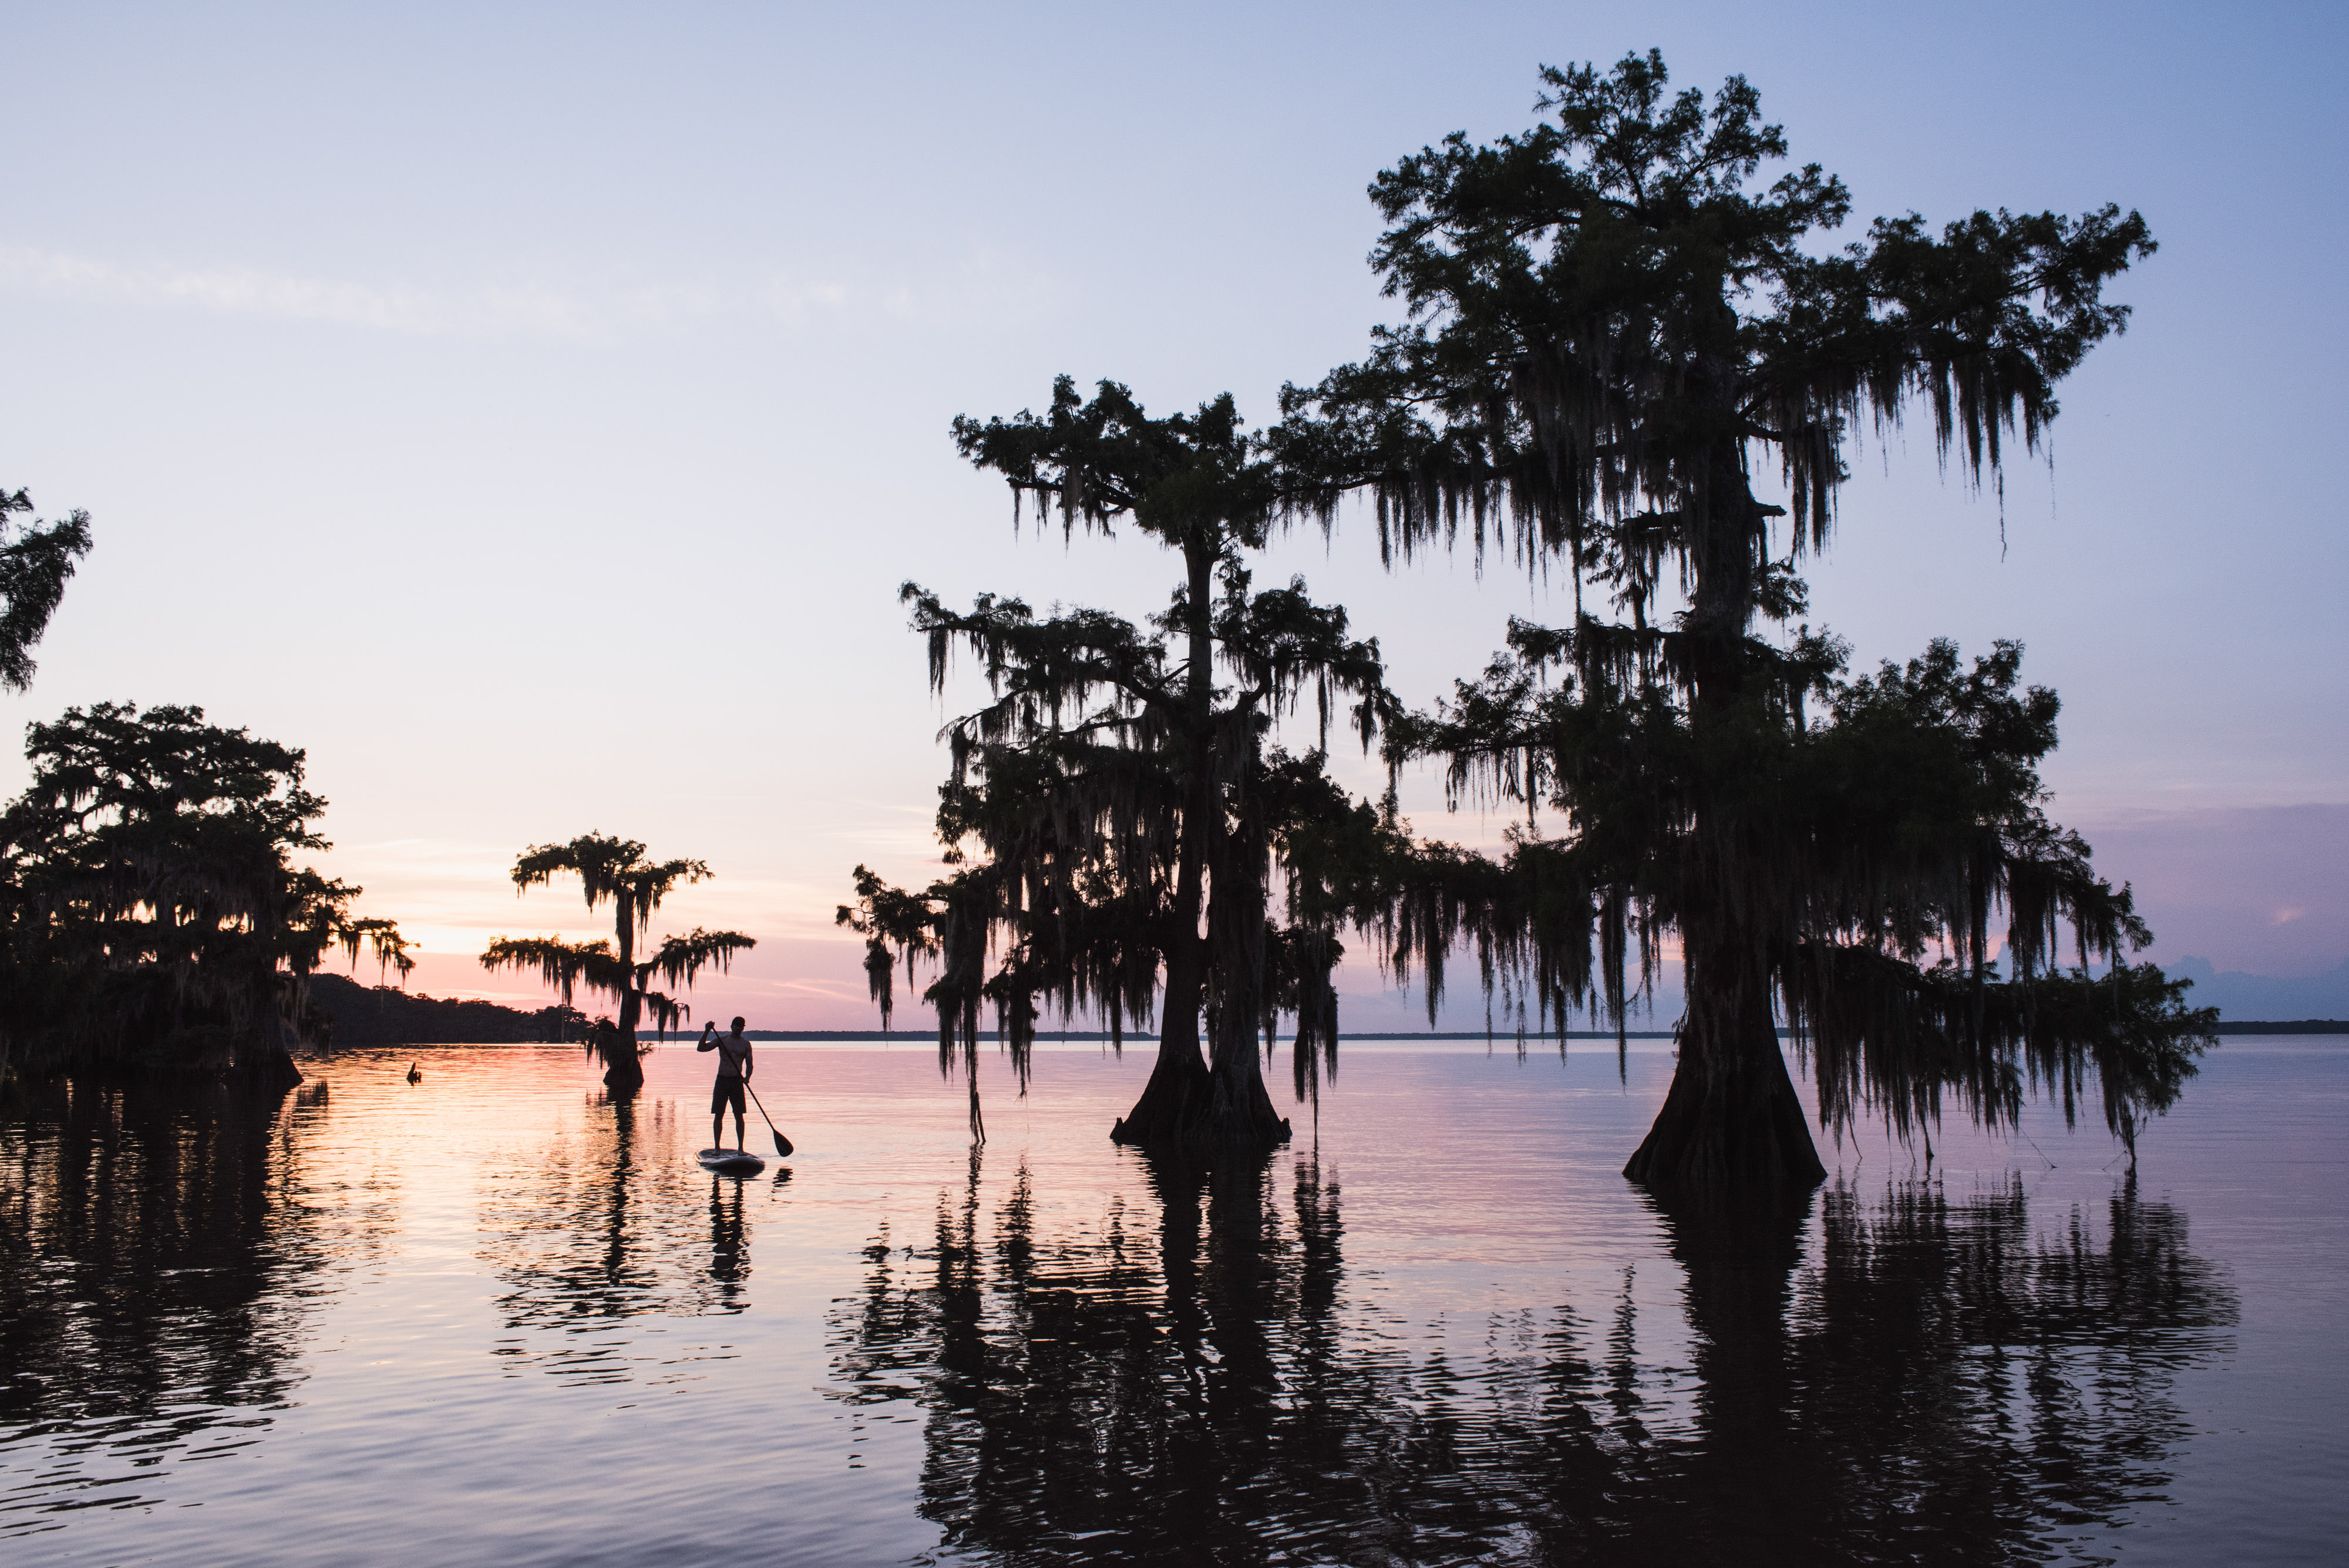 A man enjoys paddleboarding among the cypress trees in Lake Fausse Point, Louisiana.